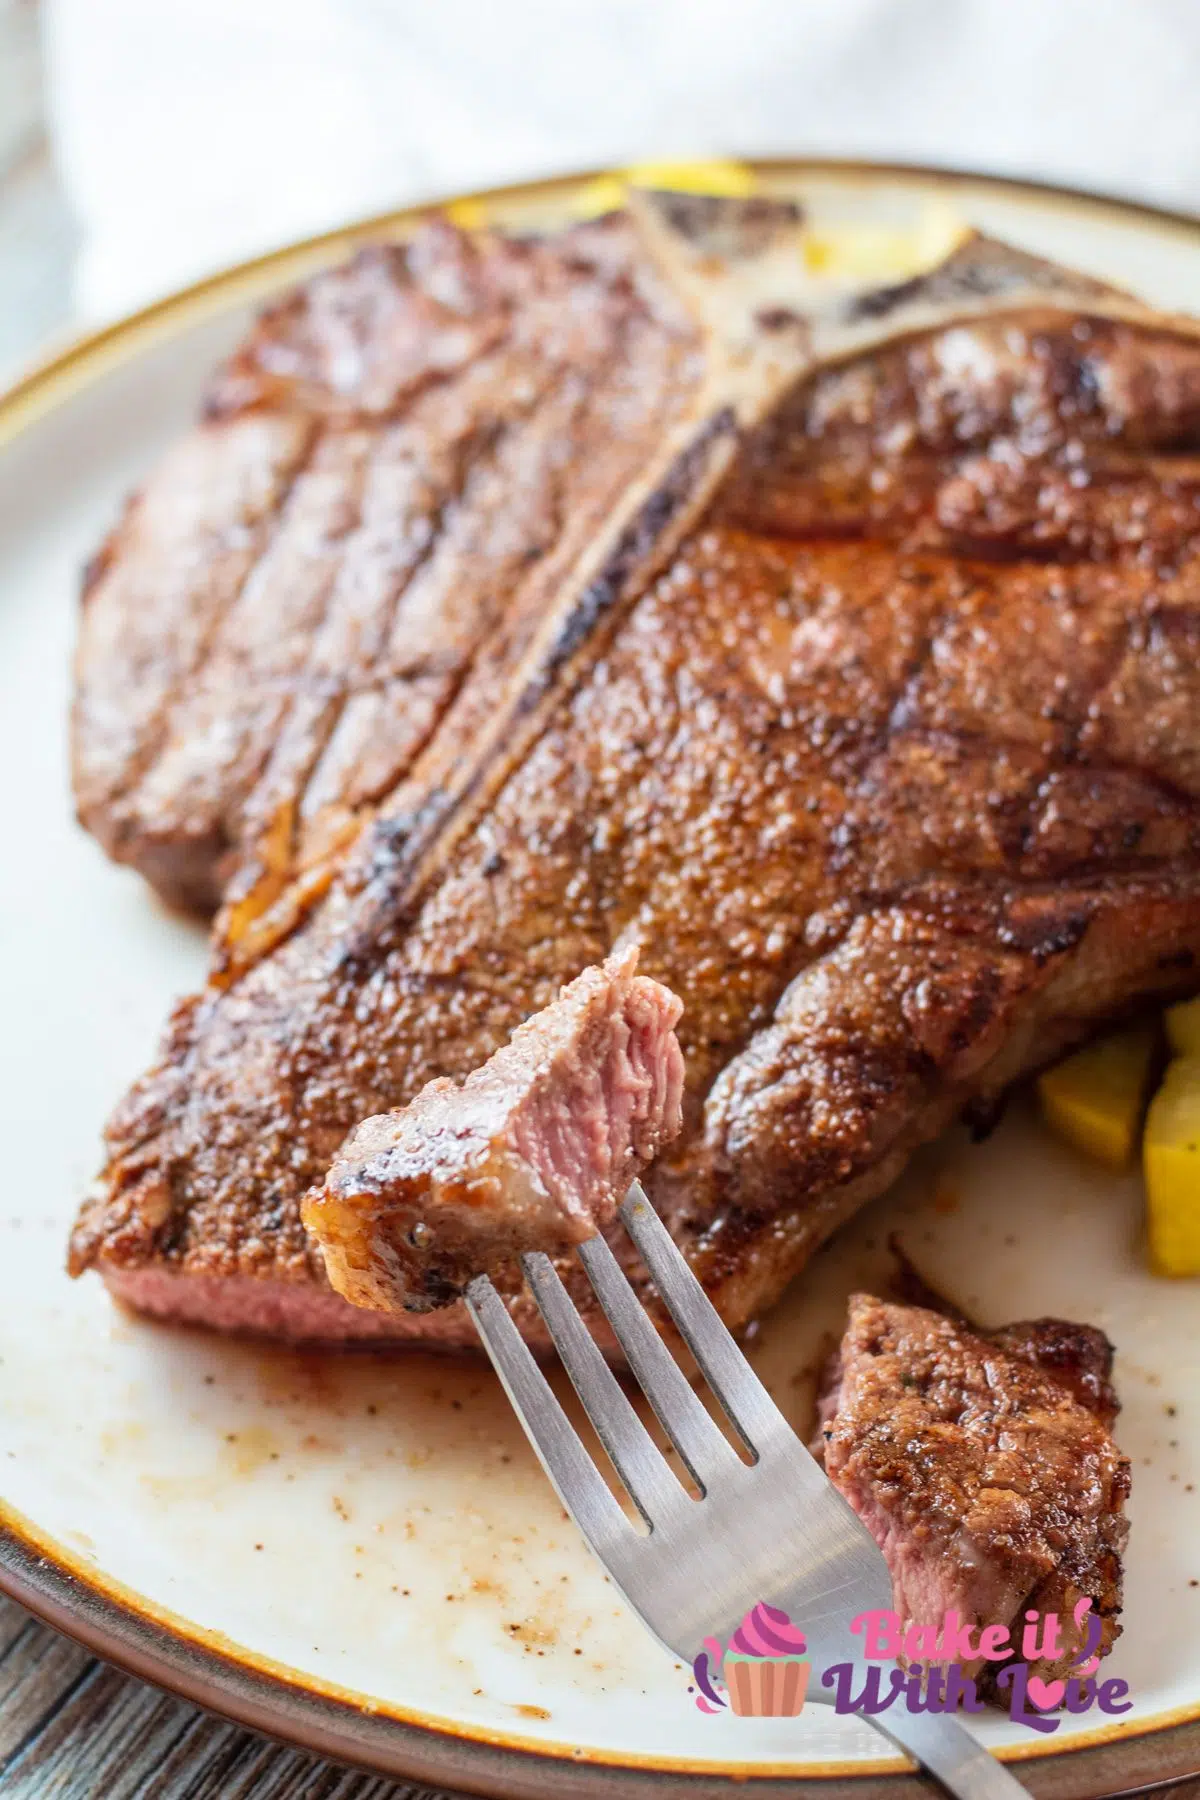 Tall image of a grilled t bone steak on a plate.